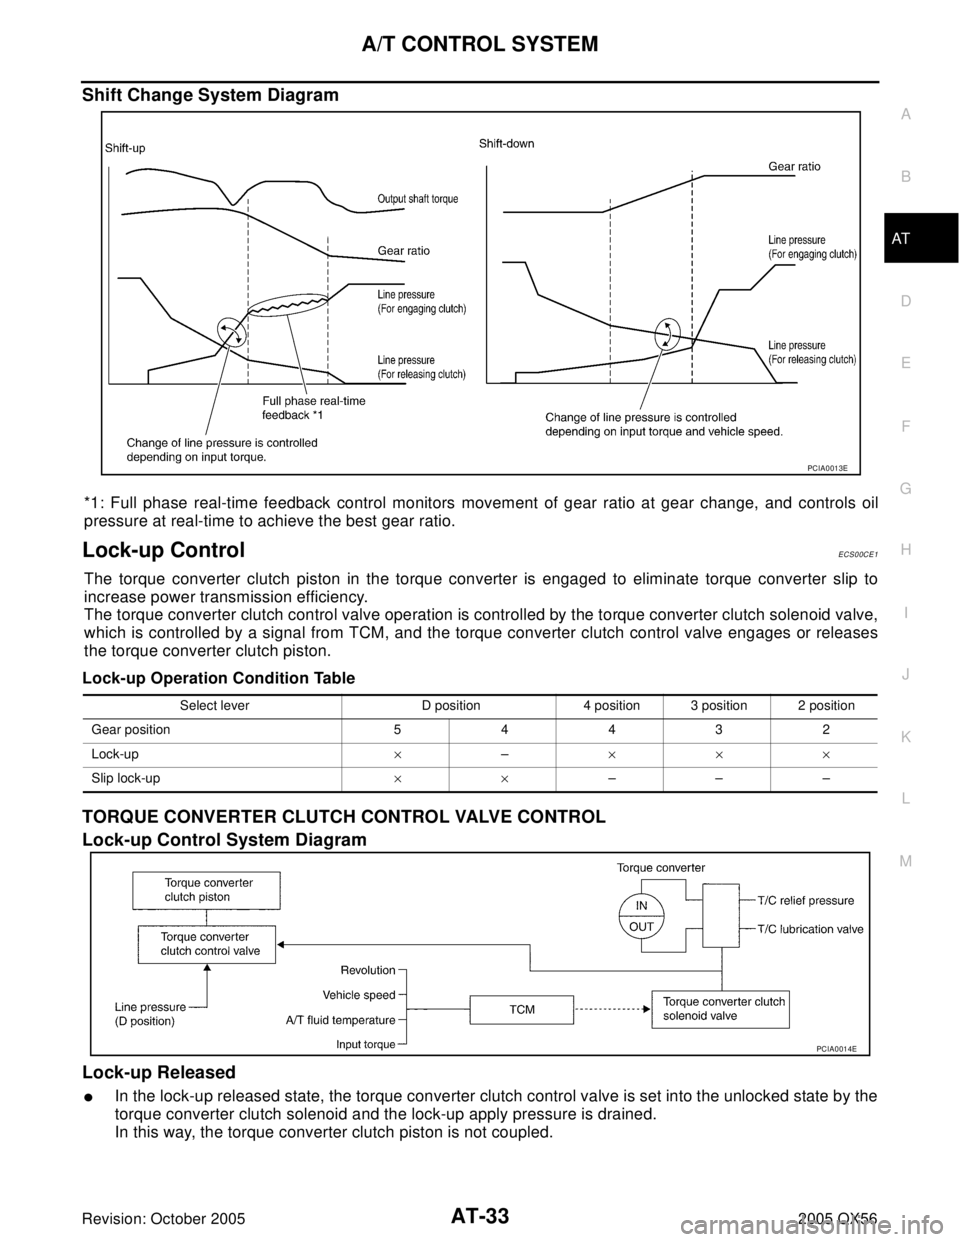 INFINITI QX4 2005  Factory Service Manual A/T CONTROL SYSTEM
AT-33
D
E
F
G
H
I
J
K
L
MA
B
AT
Revision: October 20052005 QX56
Shift Change System Diagram
*1: Full phase real-time feedback control monitors movement of gear ratio at gear change,